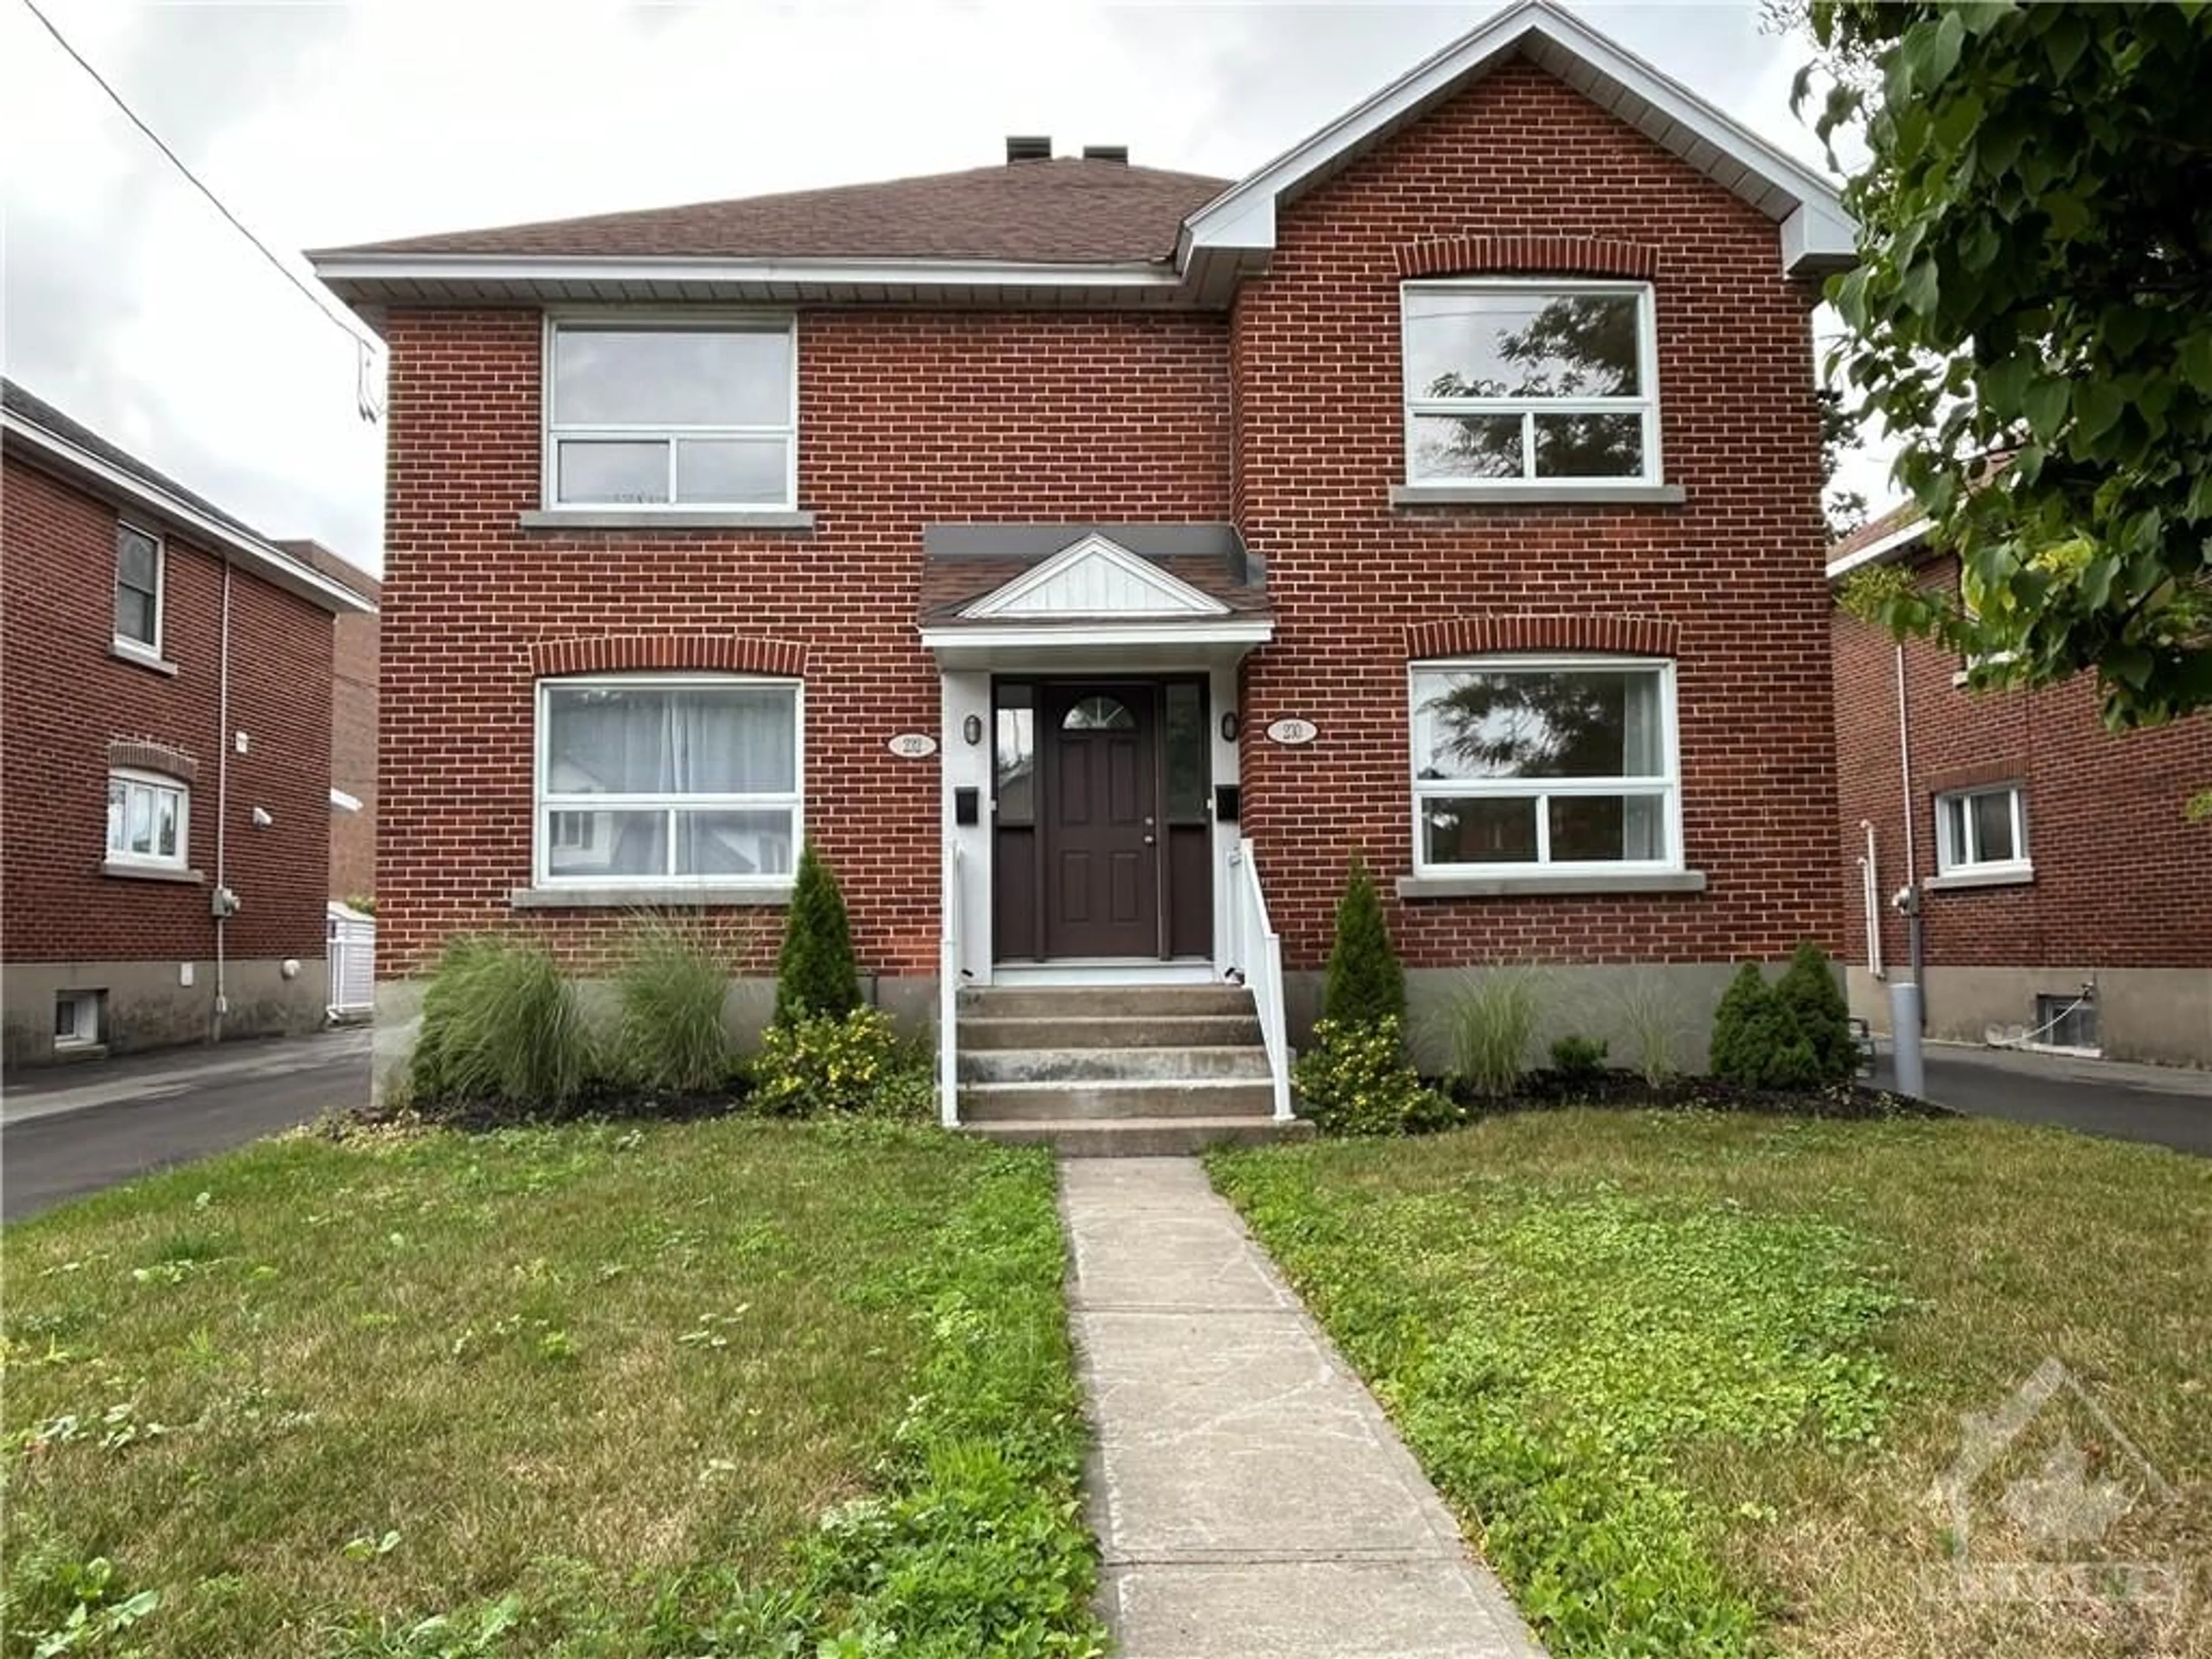 Home with brick exterior material for 232 HOLLAND Ave, Ottawa Ontario K1Y 0Y5